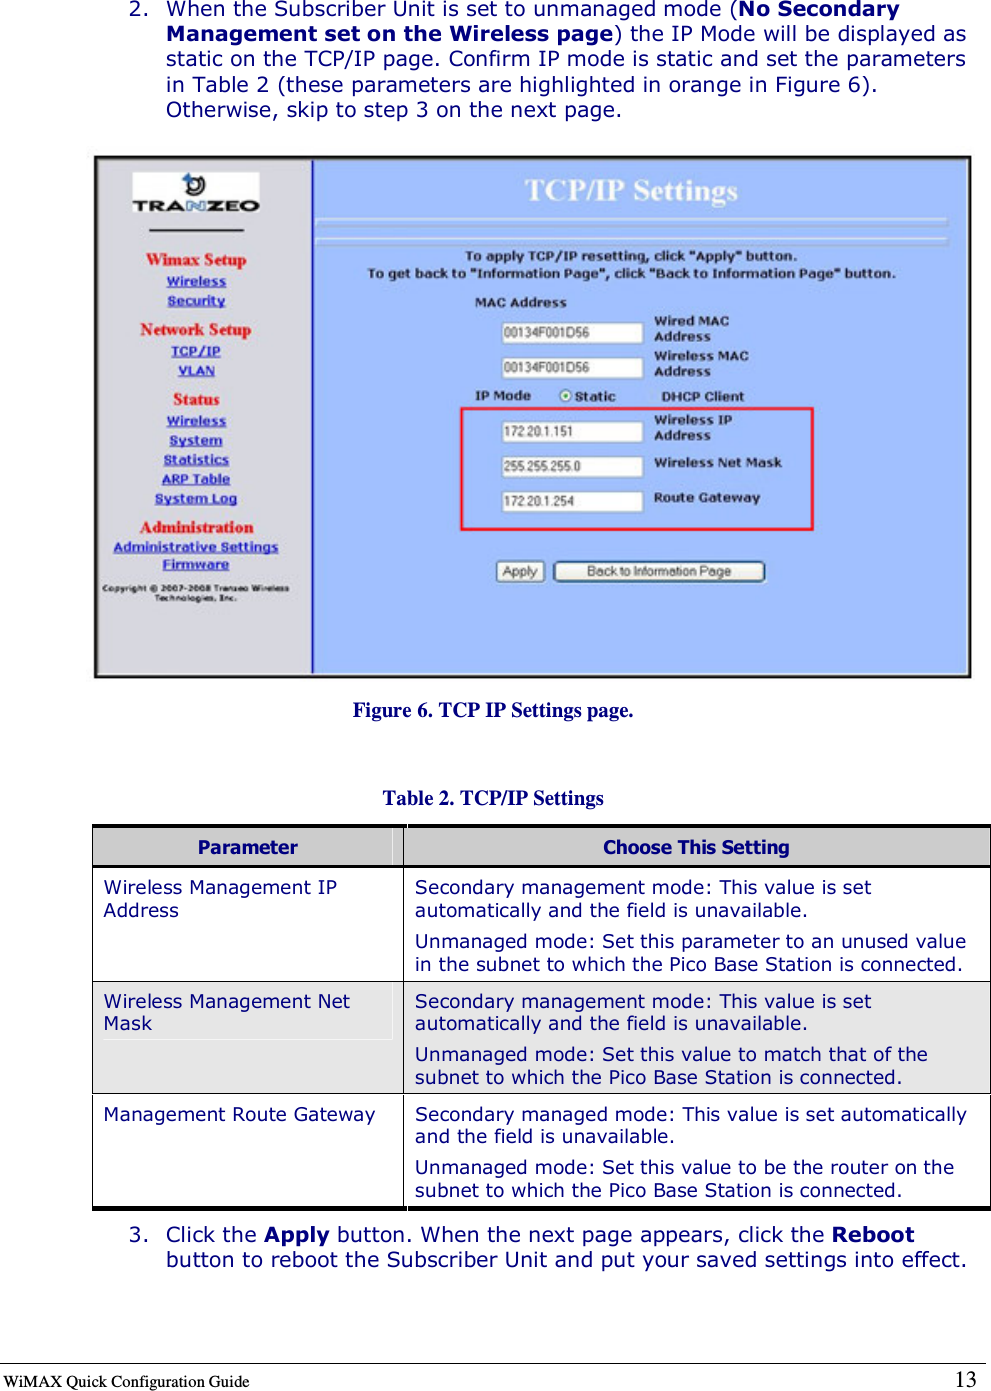  WiMAX Quick Configuration Guide   13    2. When the Subscriber Unit is set to unmanaged mode (No Secondary Management set on the Wireless page) the IP Mode will be displayed as static on the TCP/IP page. Confirm IP mode is static and set the parameters in Table 2 (these parameters are highlighted in orange in Figure 6). Otherwise, skip to step 3 on the next page.  Figure 6. TCP IP Settings page.  Table 2. TCP/IP Settings Parameter  Choose This Setting Wireless Management IP Address Secondary management mode: This value is set automatically and the field is unavailable.  Unmanaged mode: Set this parameter to an unused value in the subnet to which the Pico Base Station is connected. Wireless Management Net Mask Secondary management mode: This value is set automatically and the field is unavailable. Unmanaged mode: Set this value to match that of the subnet to which the Pico Base Station is connected. Management Route Gateway  Secondary managed mode: This value is set automatically and the field is unavailable. Unmanaged mode: Set this value to be the router on the subnet to which the Pico Base Station is connected. 3. Click the Apply button. When the next page appears, click the Reboot button to reboot the Subscriber Unit and put your saved settings into effect.  